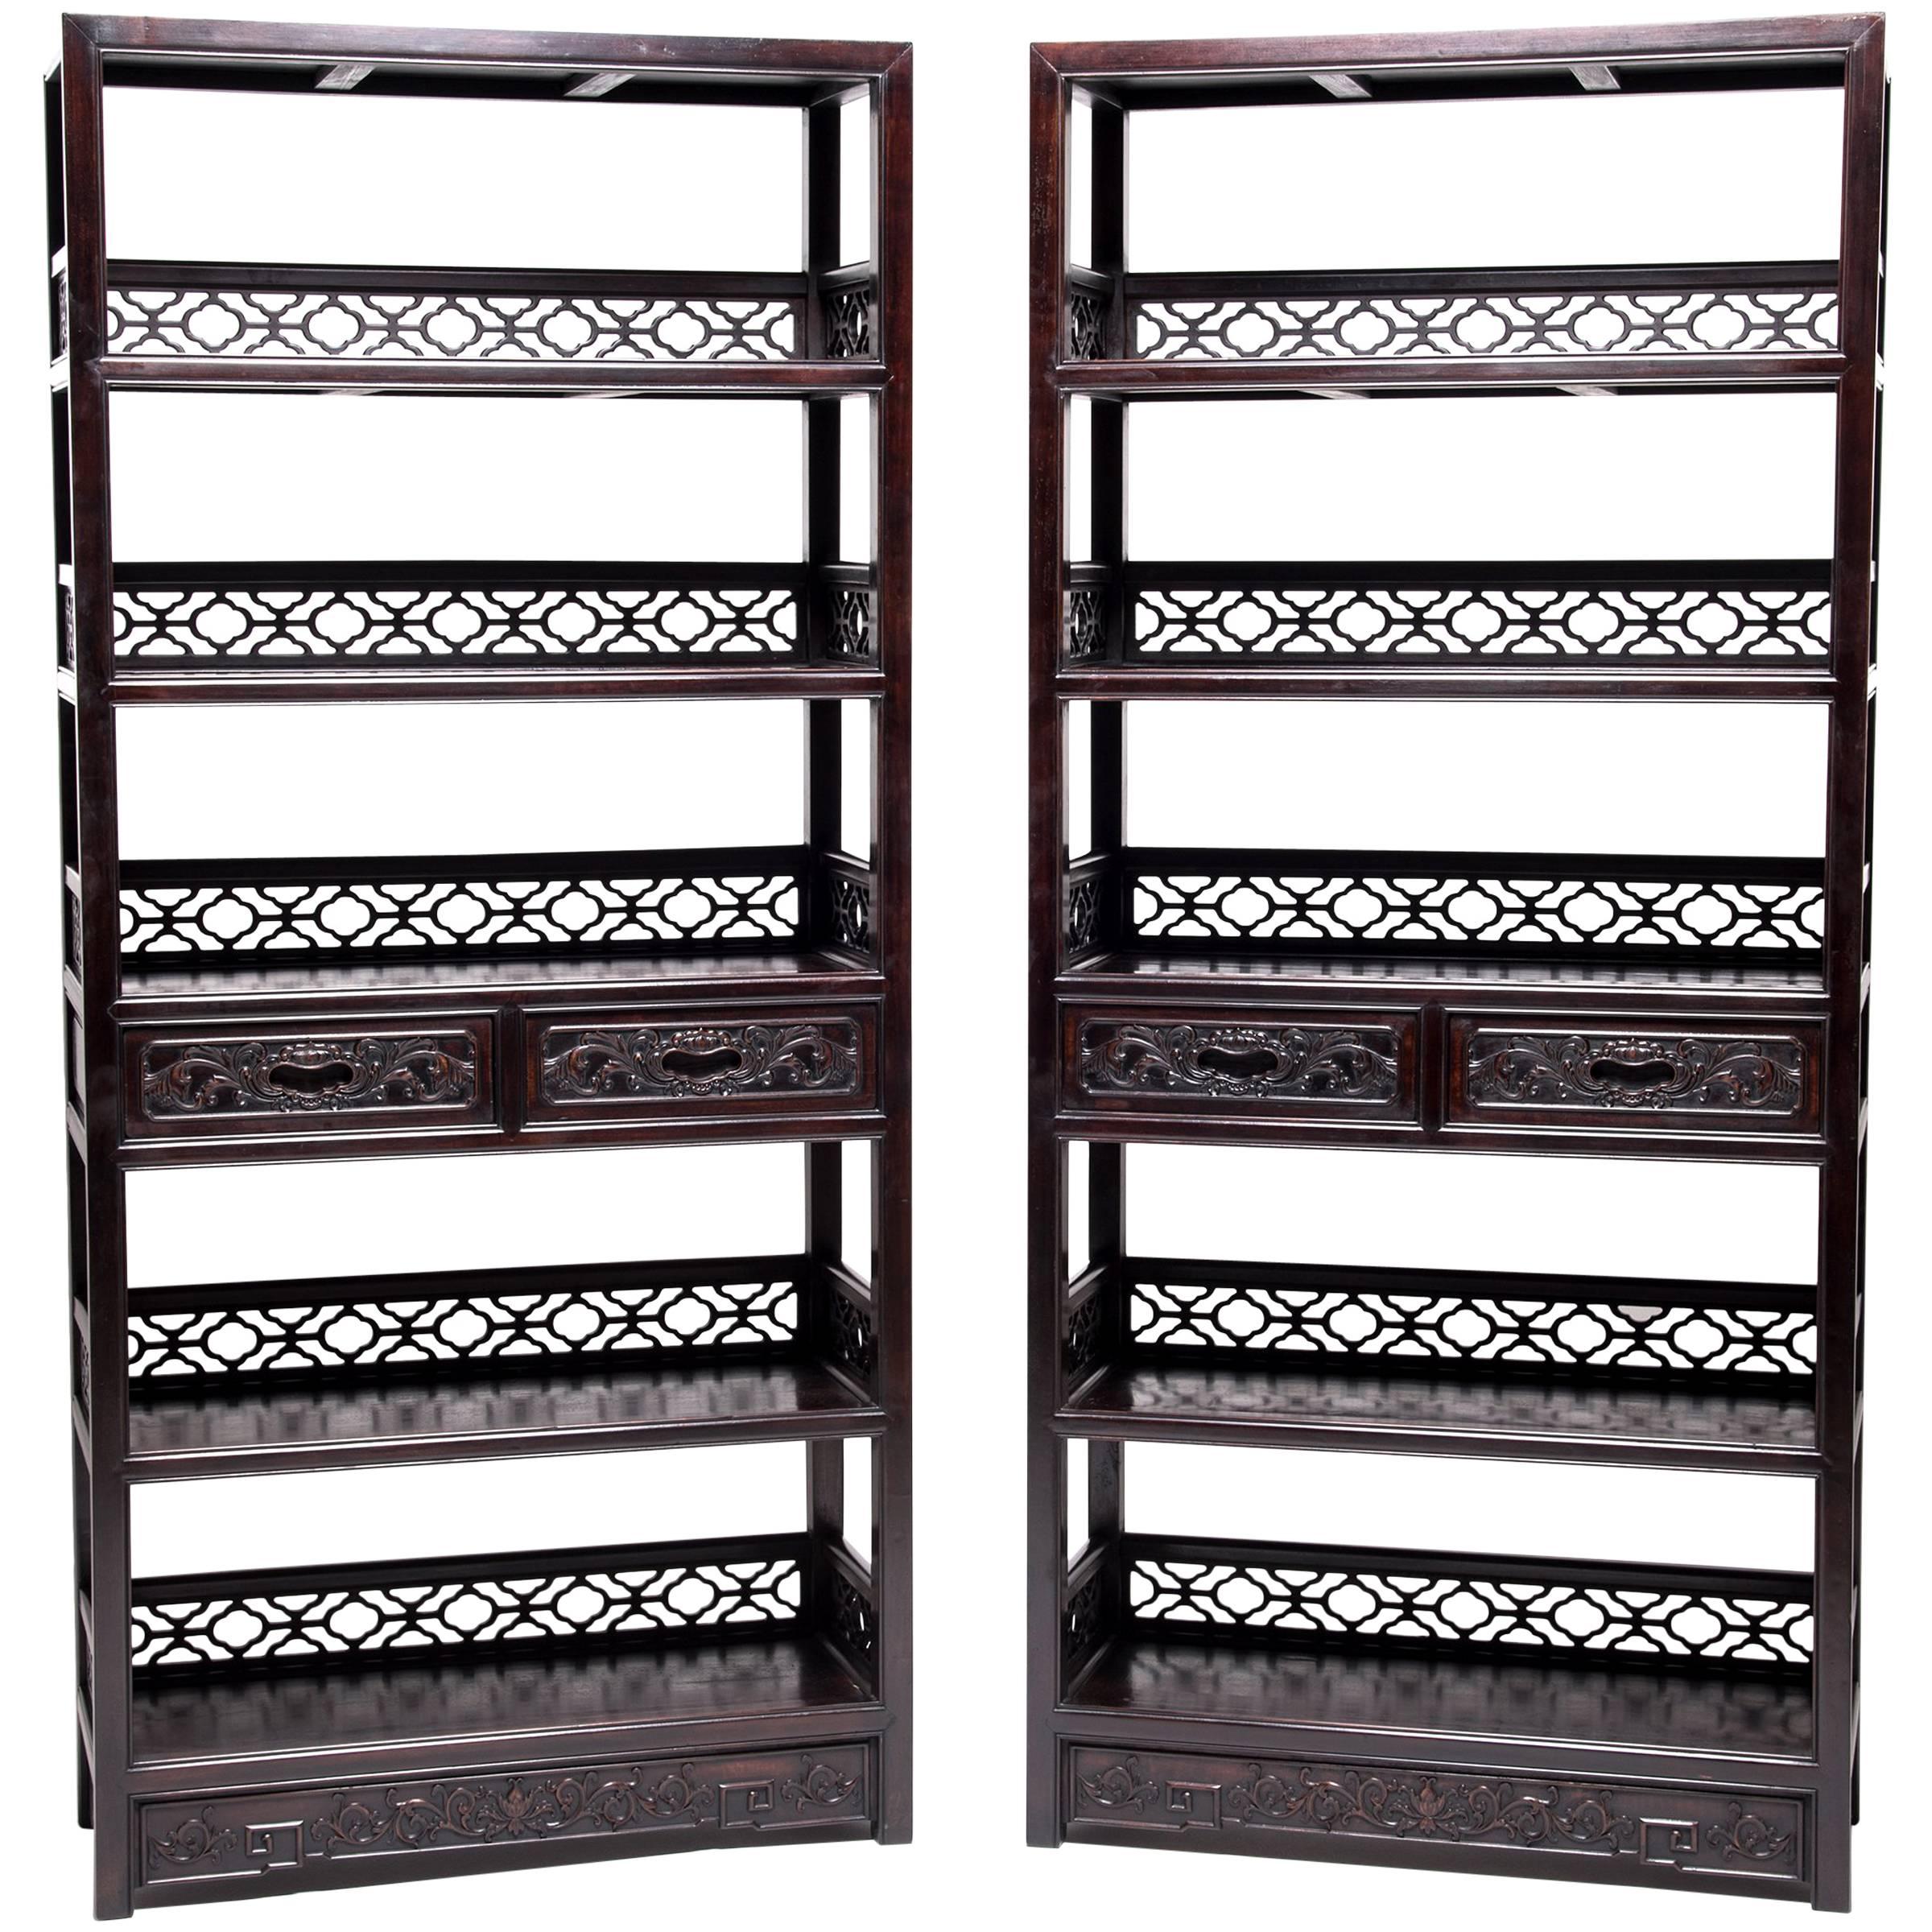 Pair of Fine Chinese Scholar's Scroll Shelves